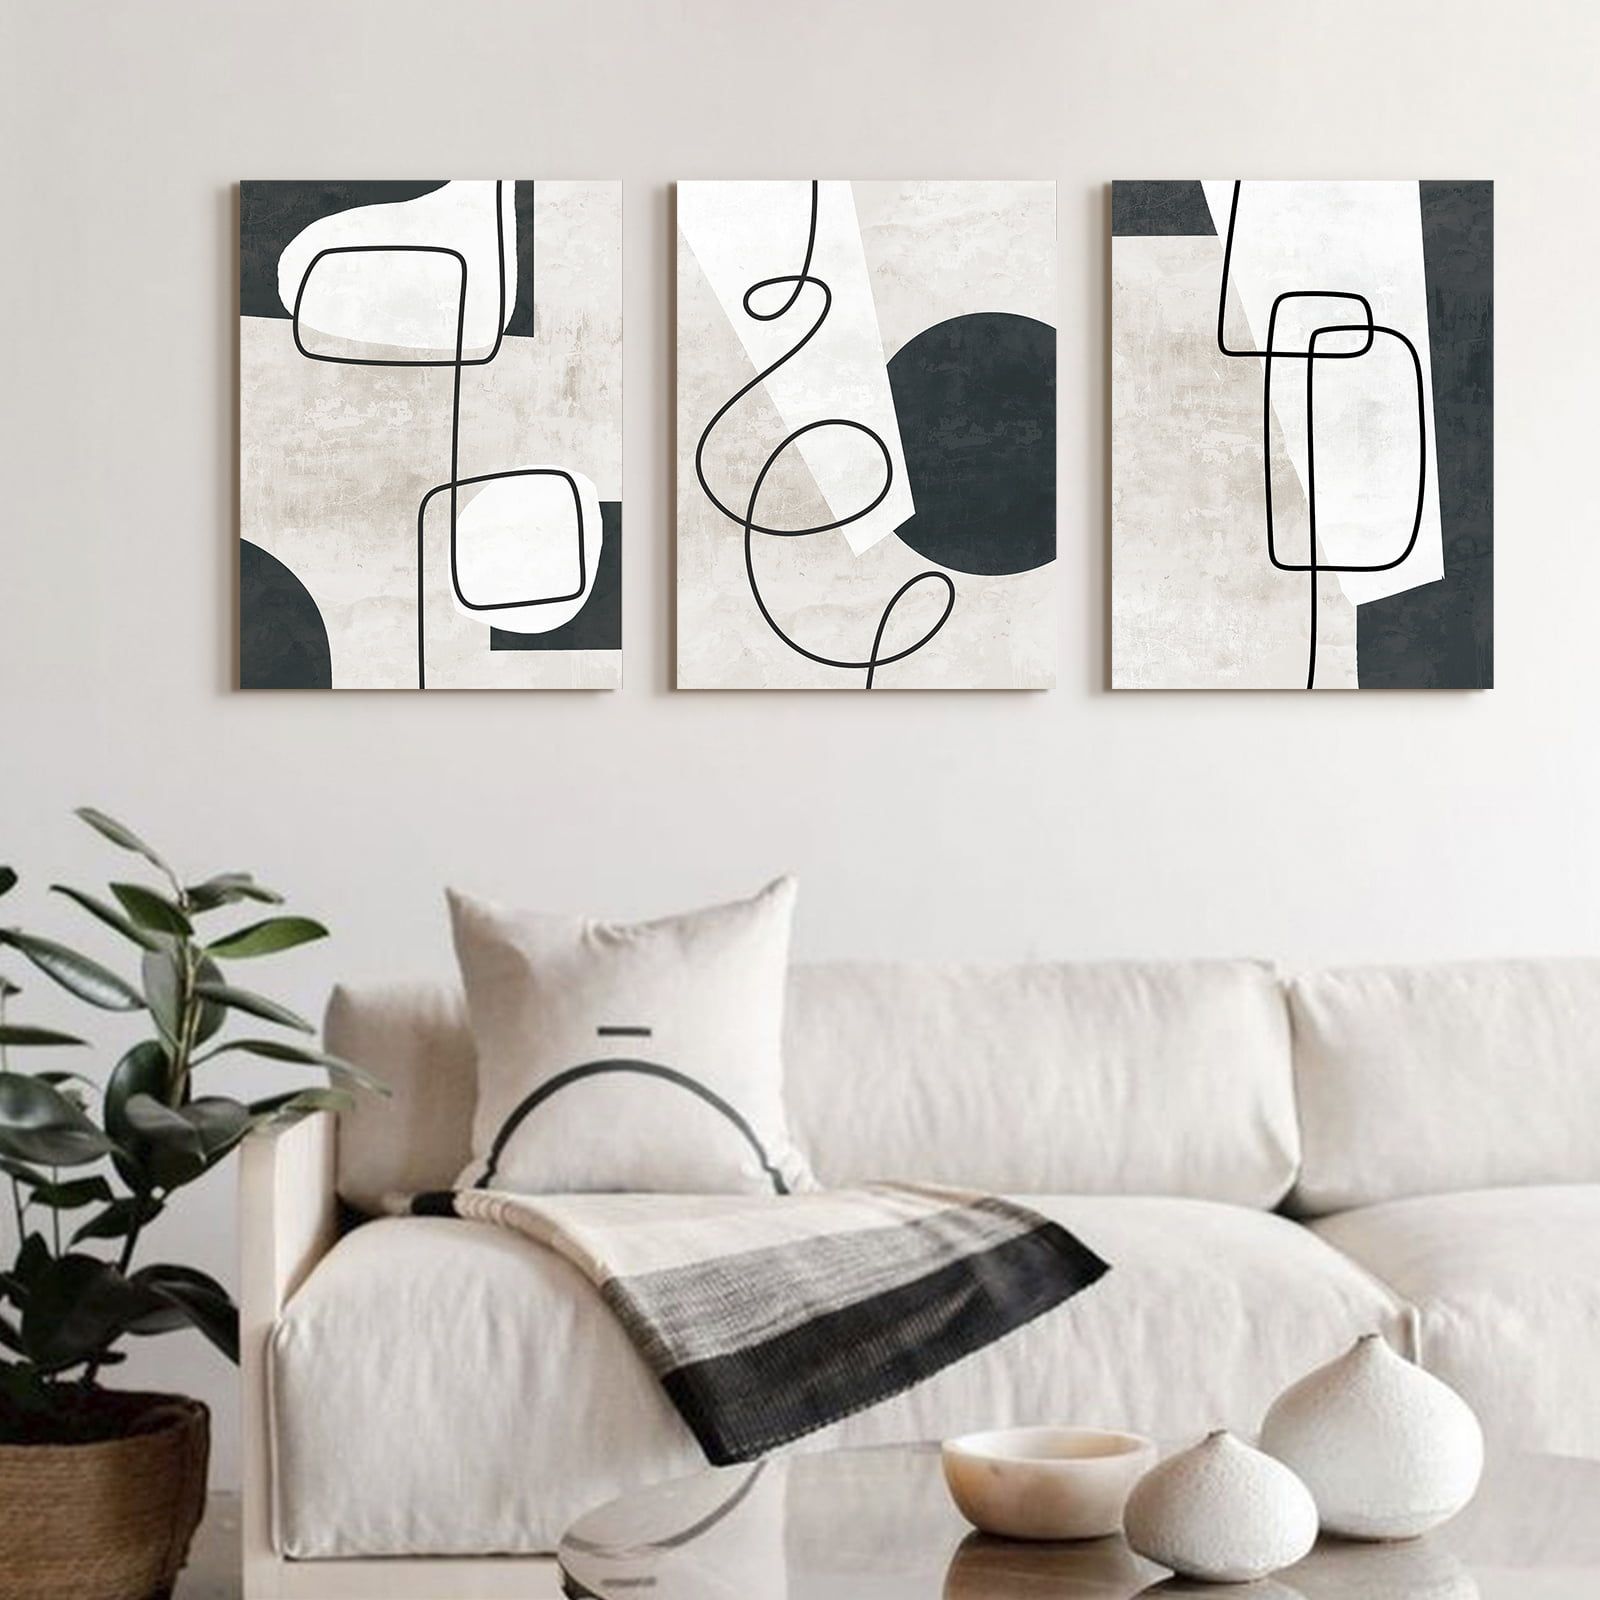 Artbyhannah 3 Pieces 16x24 Inch Modern Abstract Wall Art Decor, Black And  White Canvas Wall Print Set With Minimalist Art Prints For Living Room –  Walmart Inside 2018 Black Minimalist Wall Art (View 4 of 20)